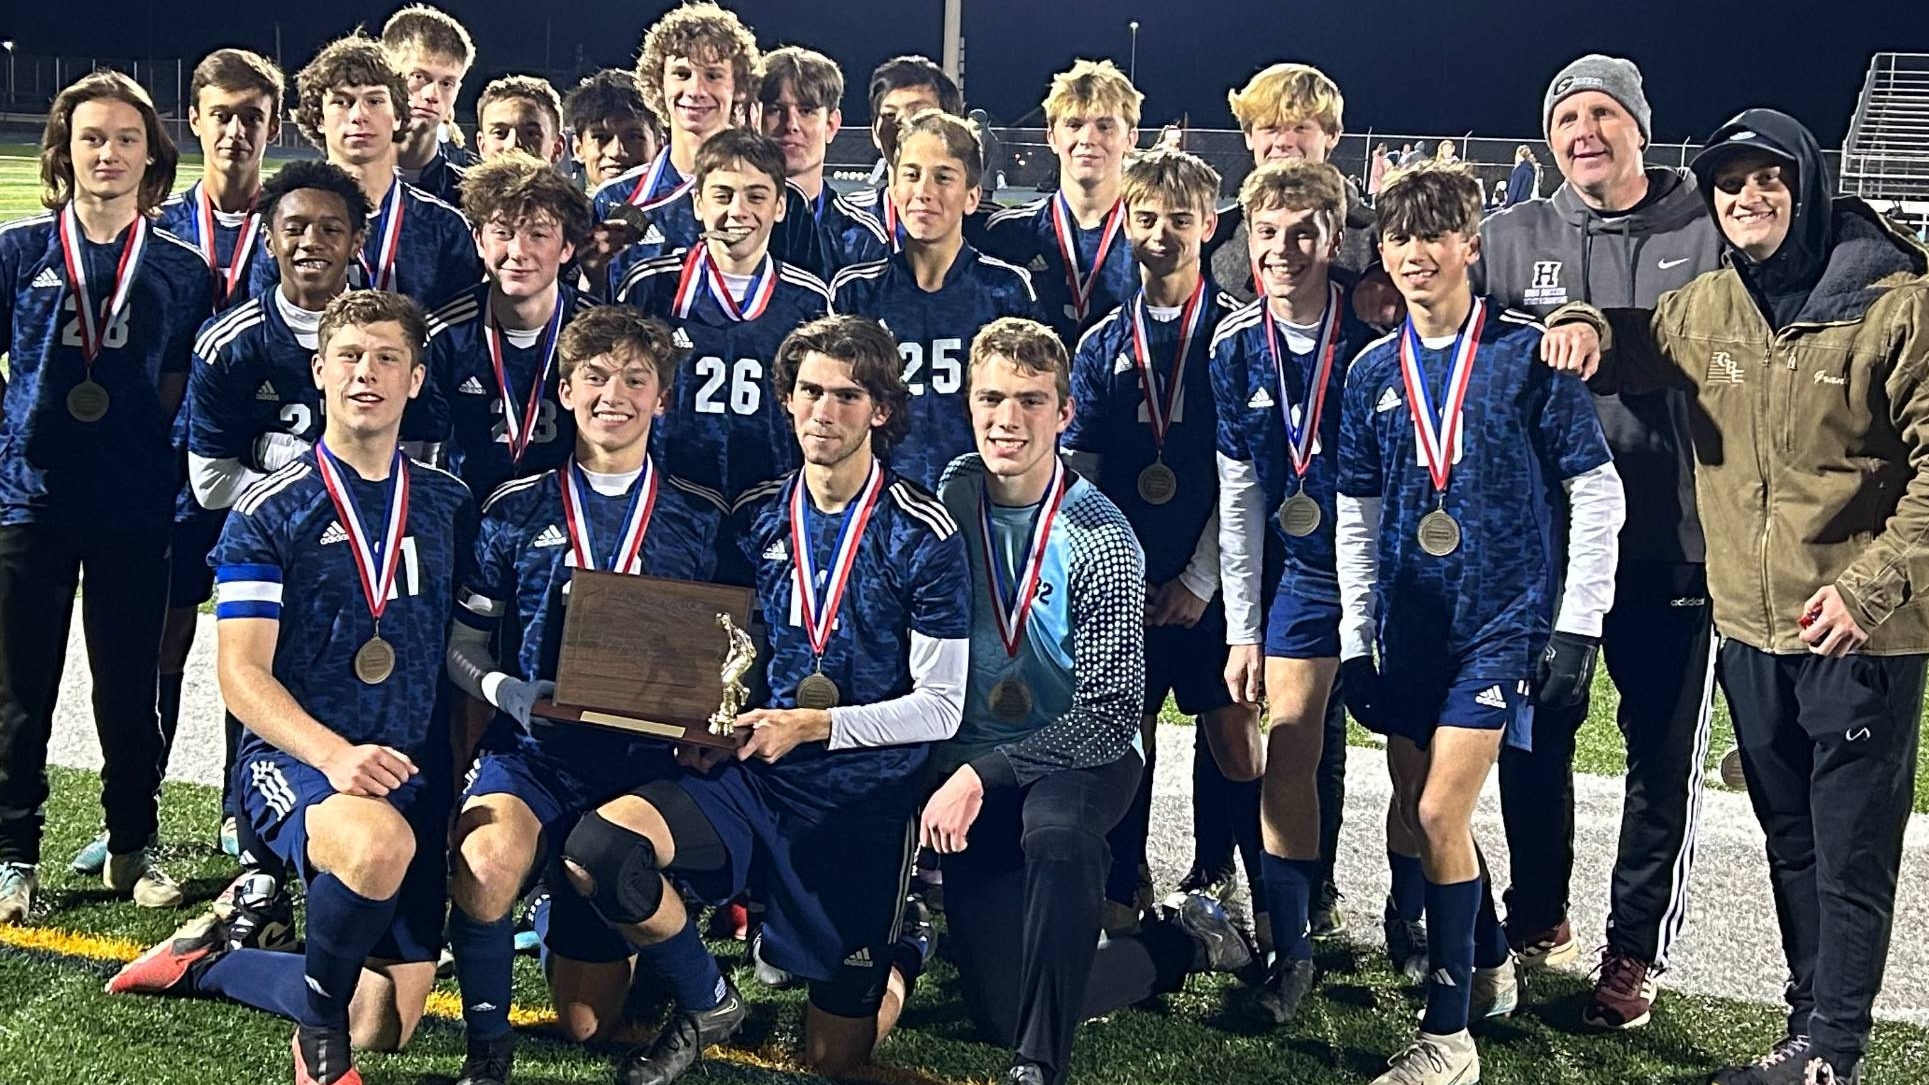 D6 Class AAA Boys Soccer Champions - Content Image for hollidaysburgareashs_bigteams_26317